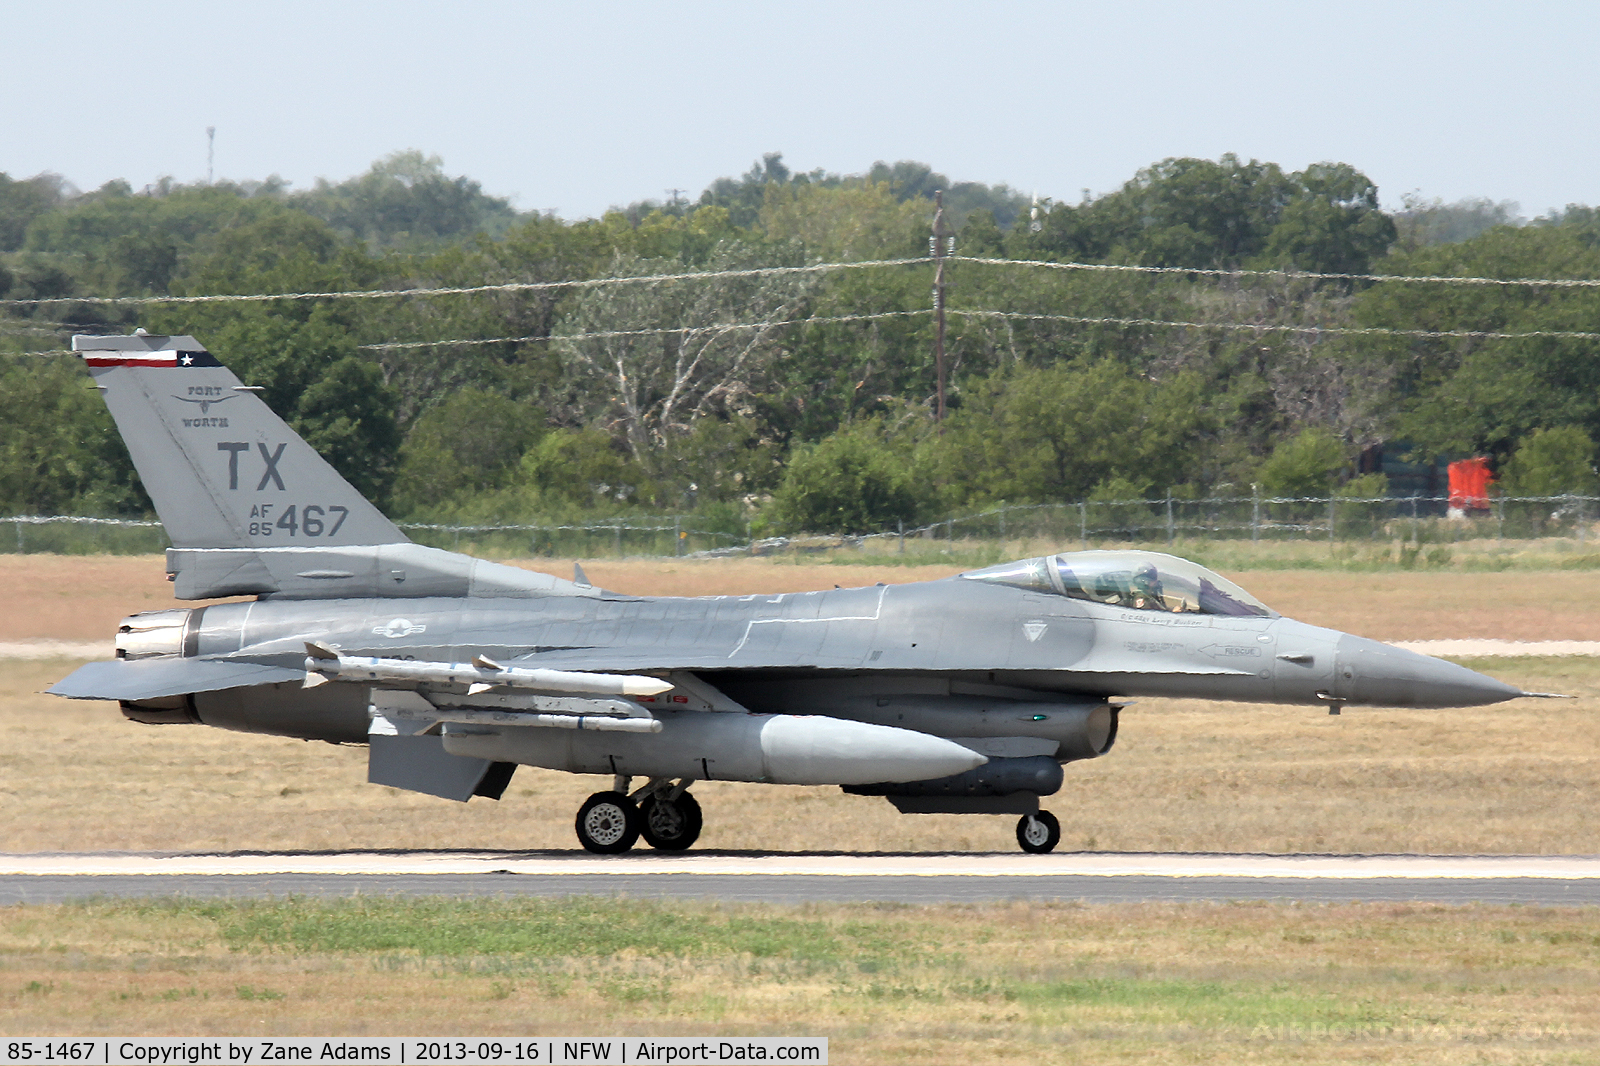 85-1467, 1986 General Dynamics F-16C Fighting Falcon C/N 5C-247, 301st Fighter Wing F-16 at NAS Fort Worth